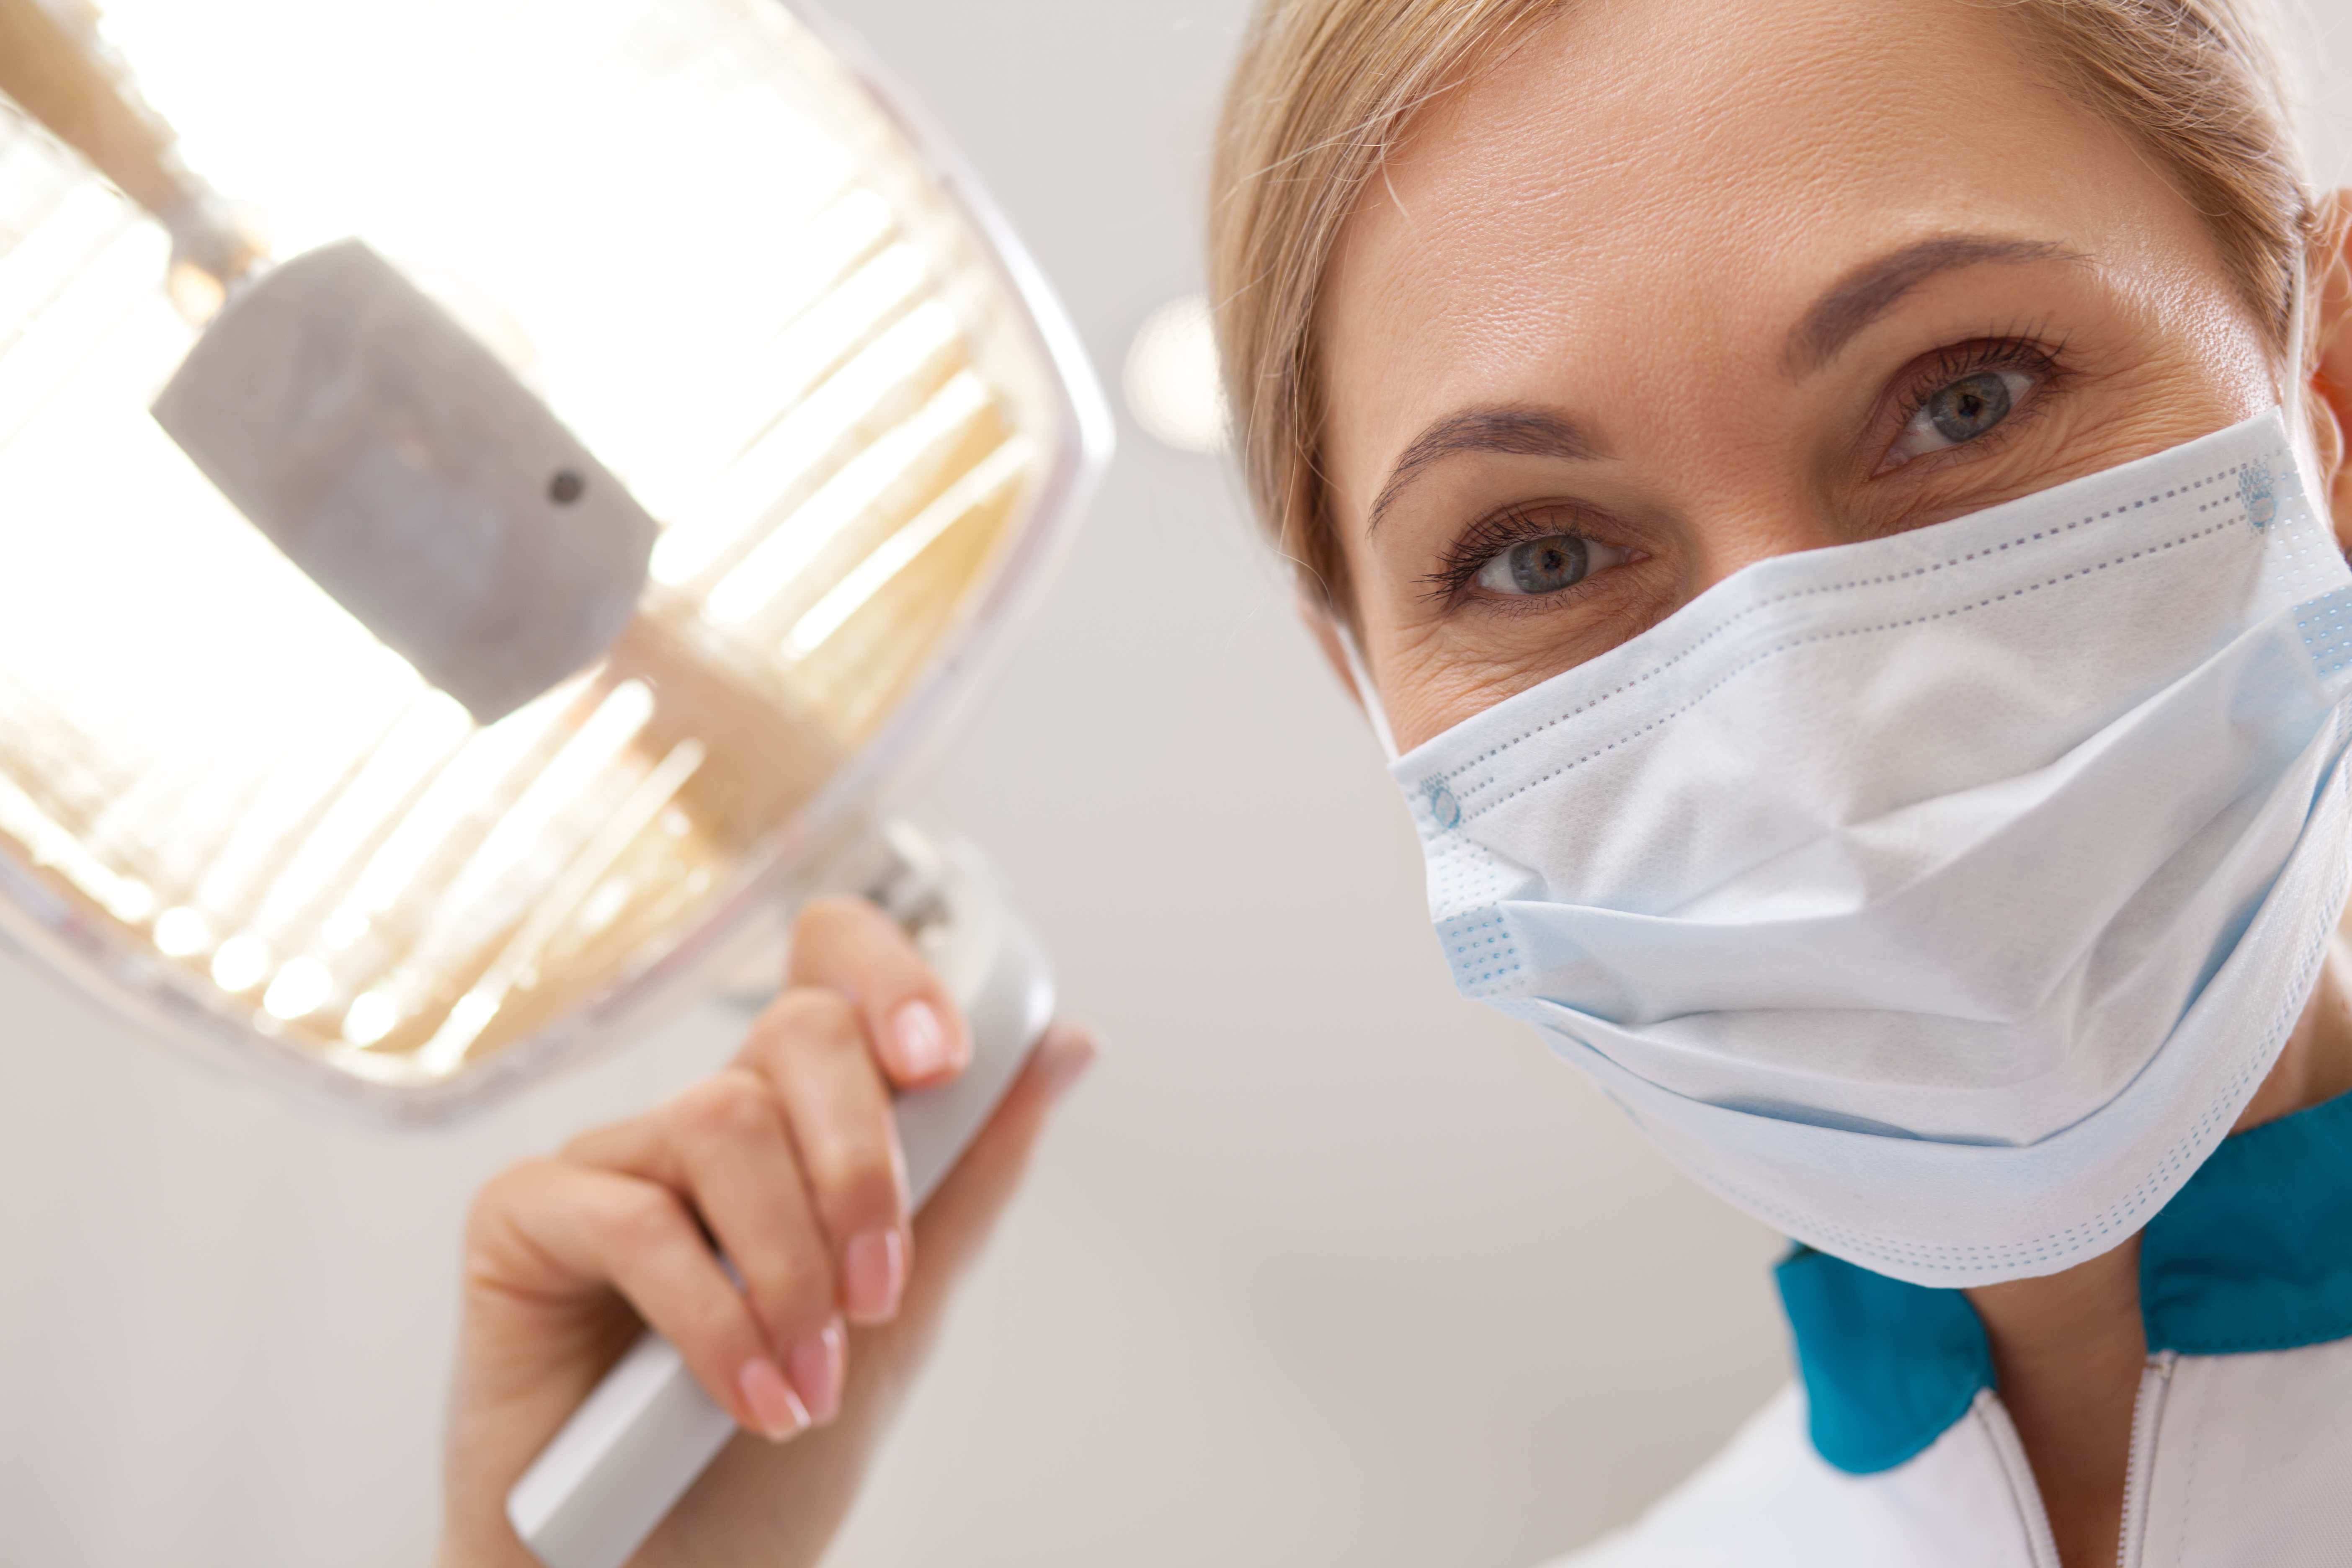 When Should You Go For a Dental Checkup?